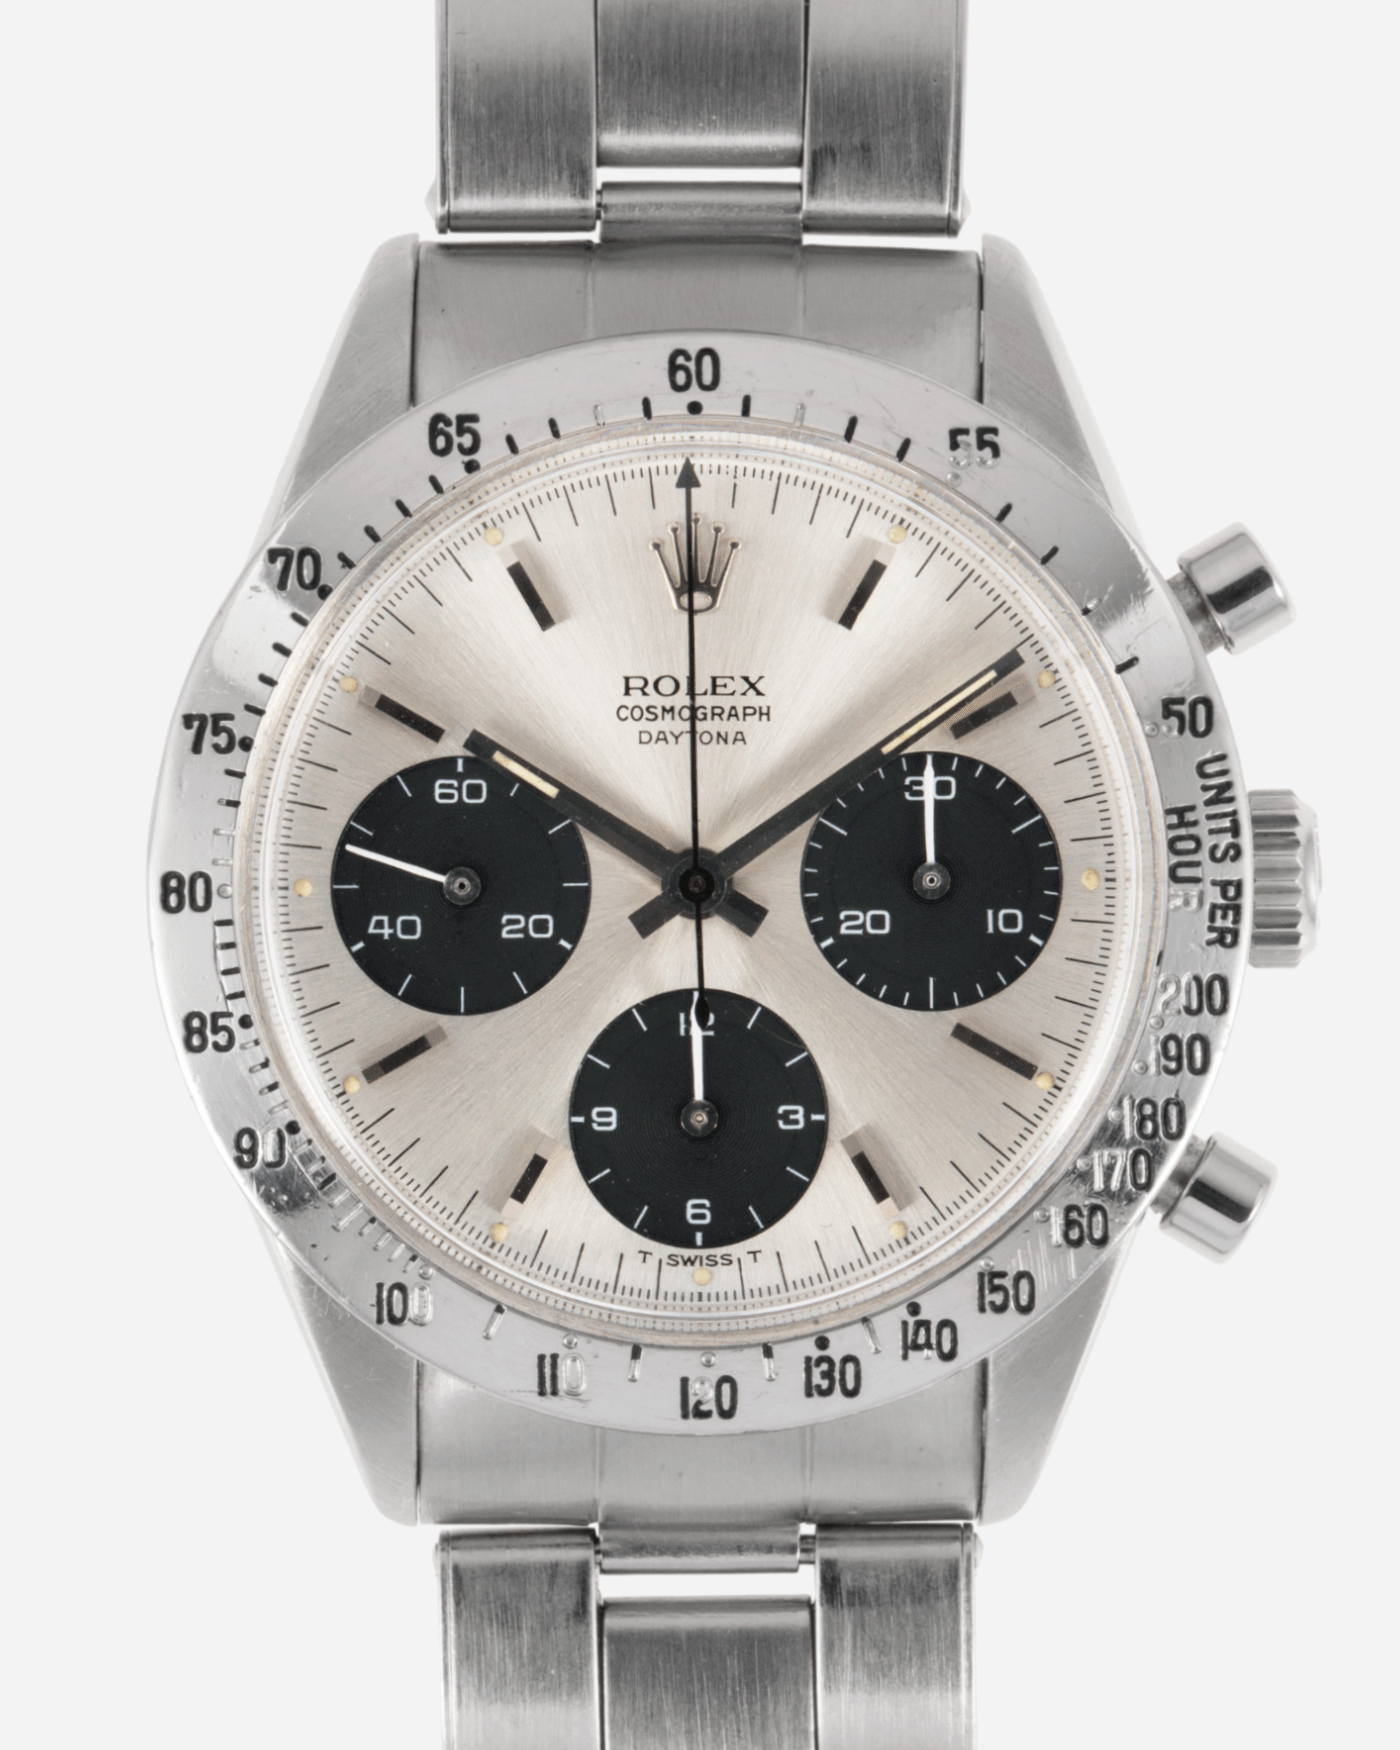 Brand: Rolex Year: 1966 Model: Cosmograph Daytona Reference Number: 6239 Serial Number: 1,4XX,XXX Material: Stainless Steel Movement: Valjoux 72 Case Diameter: 36.5mm Strap: Rolex 7205 Folded Oyster Bracelet with 57 Endlinks, Stamped 4.66